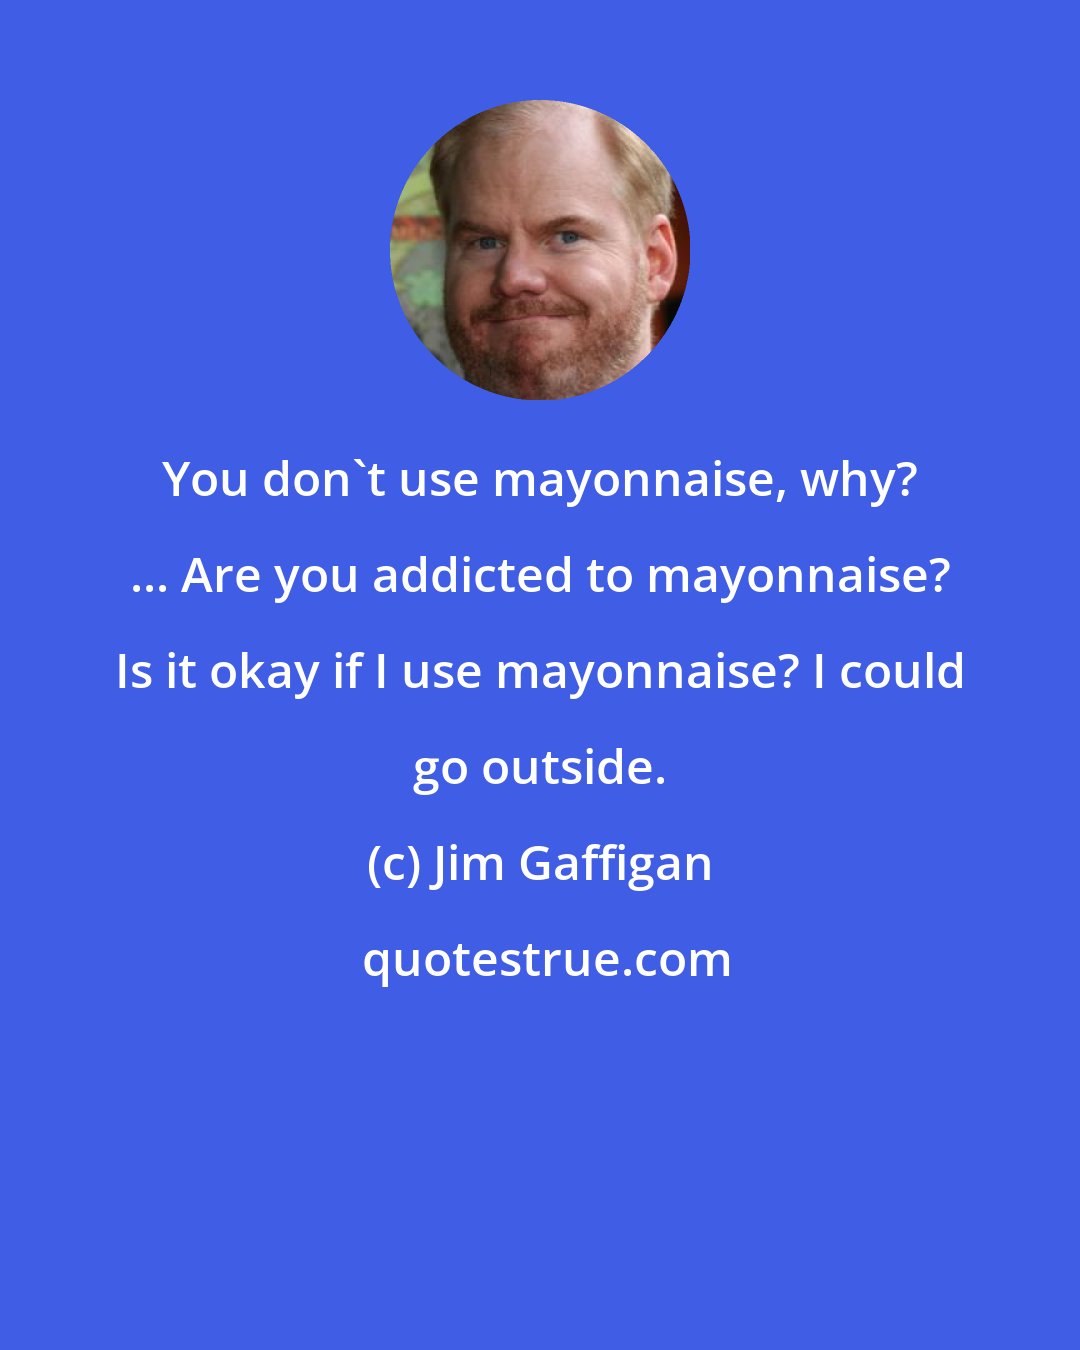 Jim Gaffigan: You don't use mayonnaise, why? ... Are you addicted to mayonnaise? Is it okay if I use mayonnaise? I could go outside.